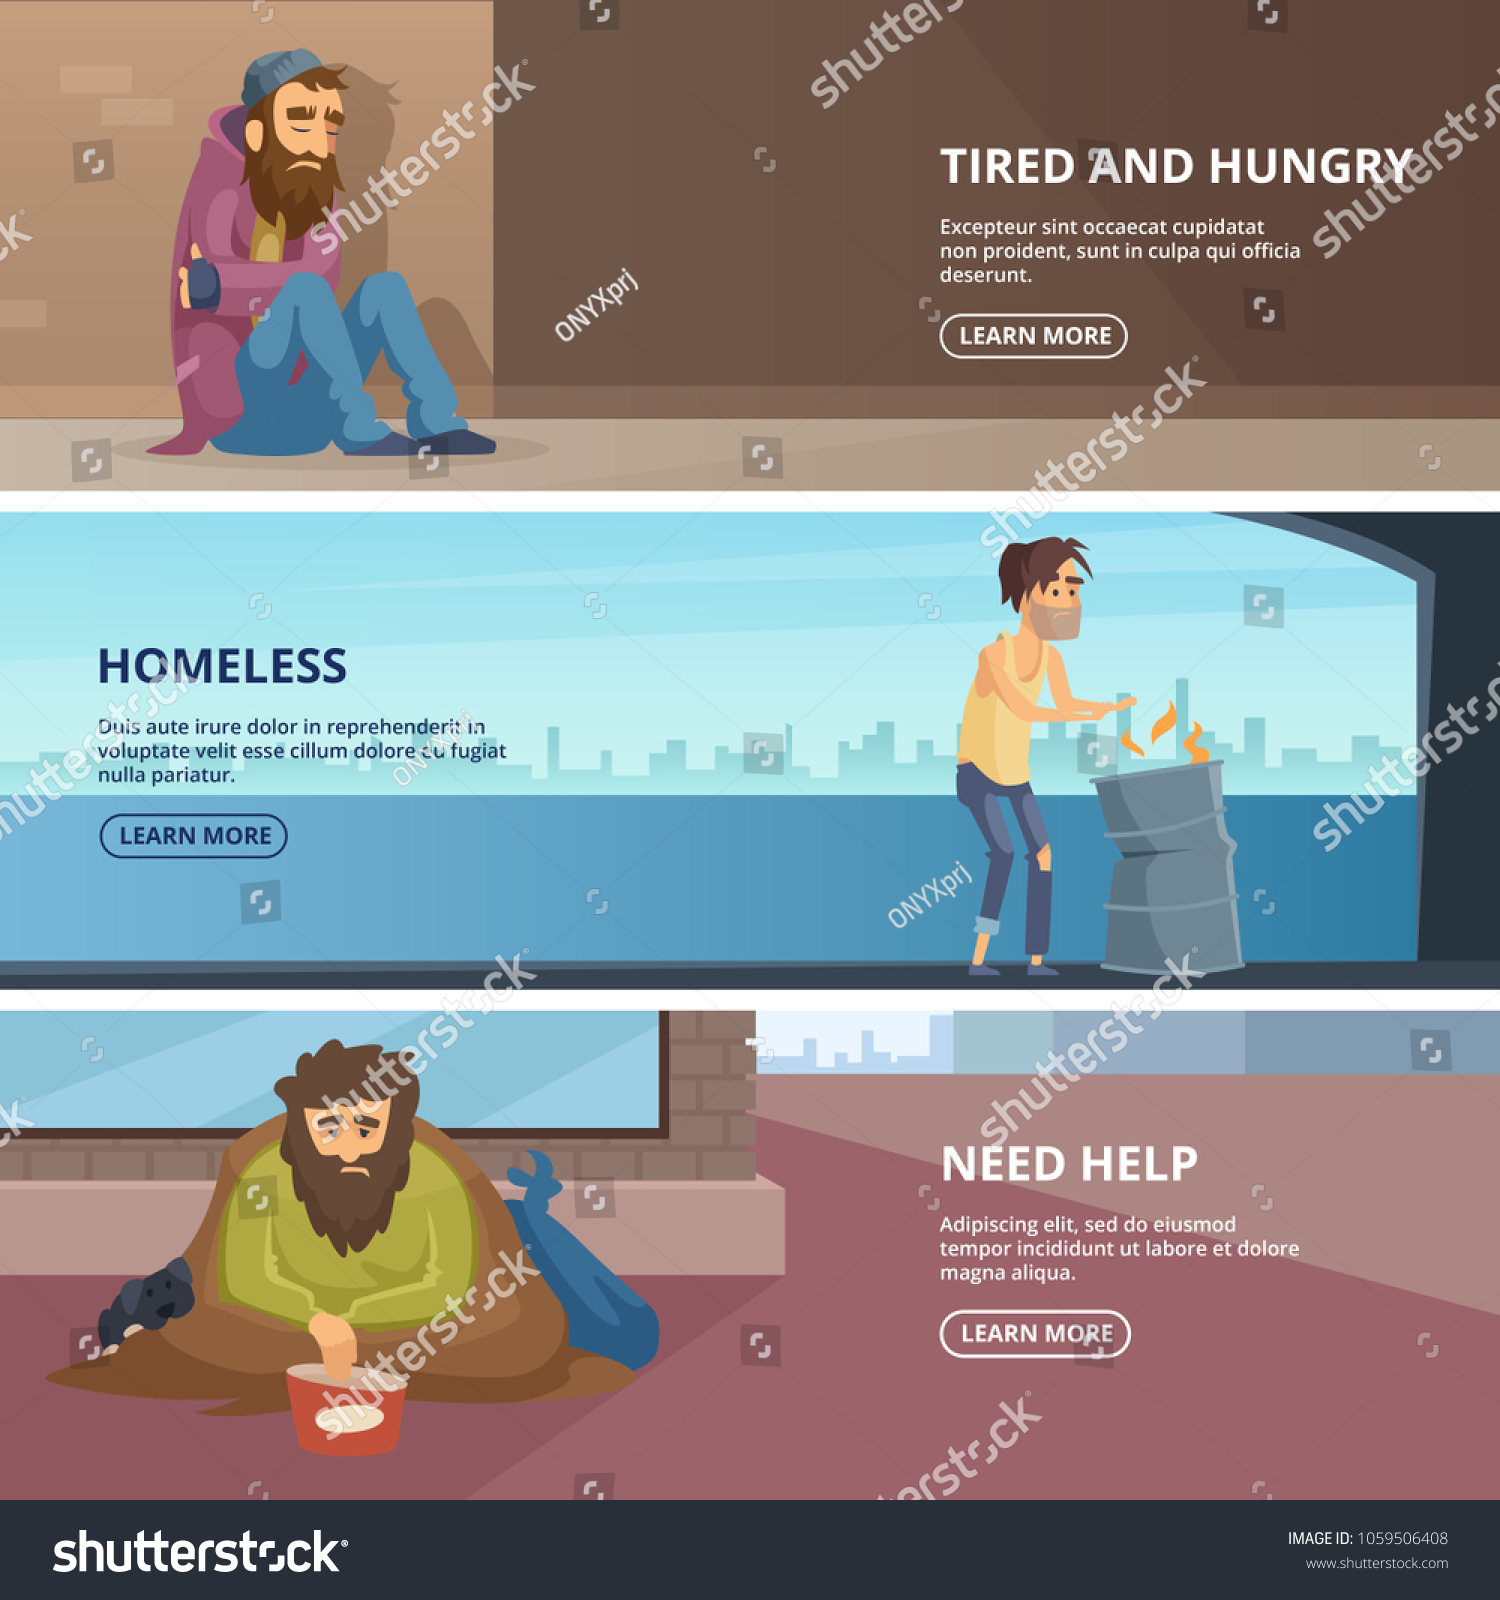 SVG of Vector horizontal banners with illustrations of poor and homeless peoples. Horizontal banner with hopeless and workless need help svg